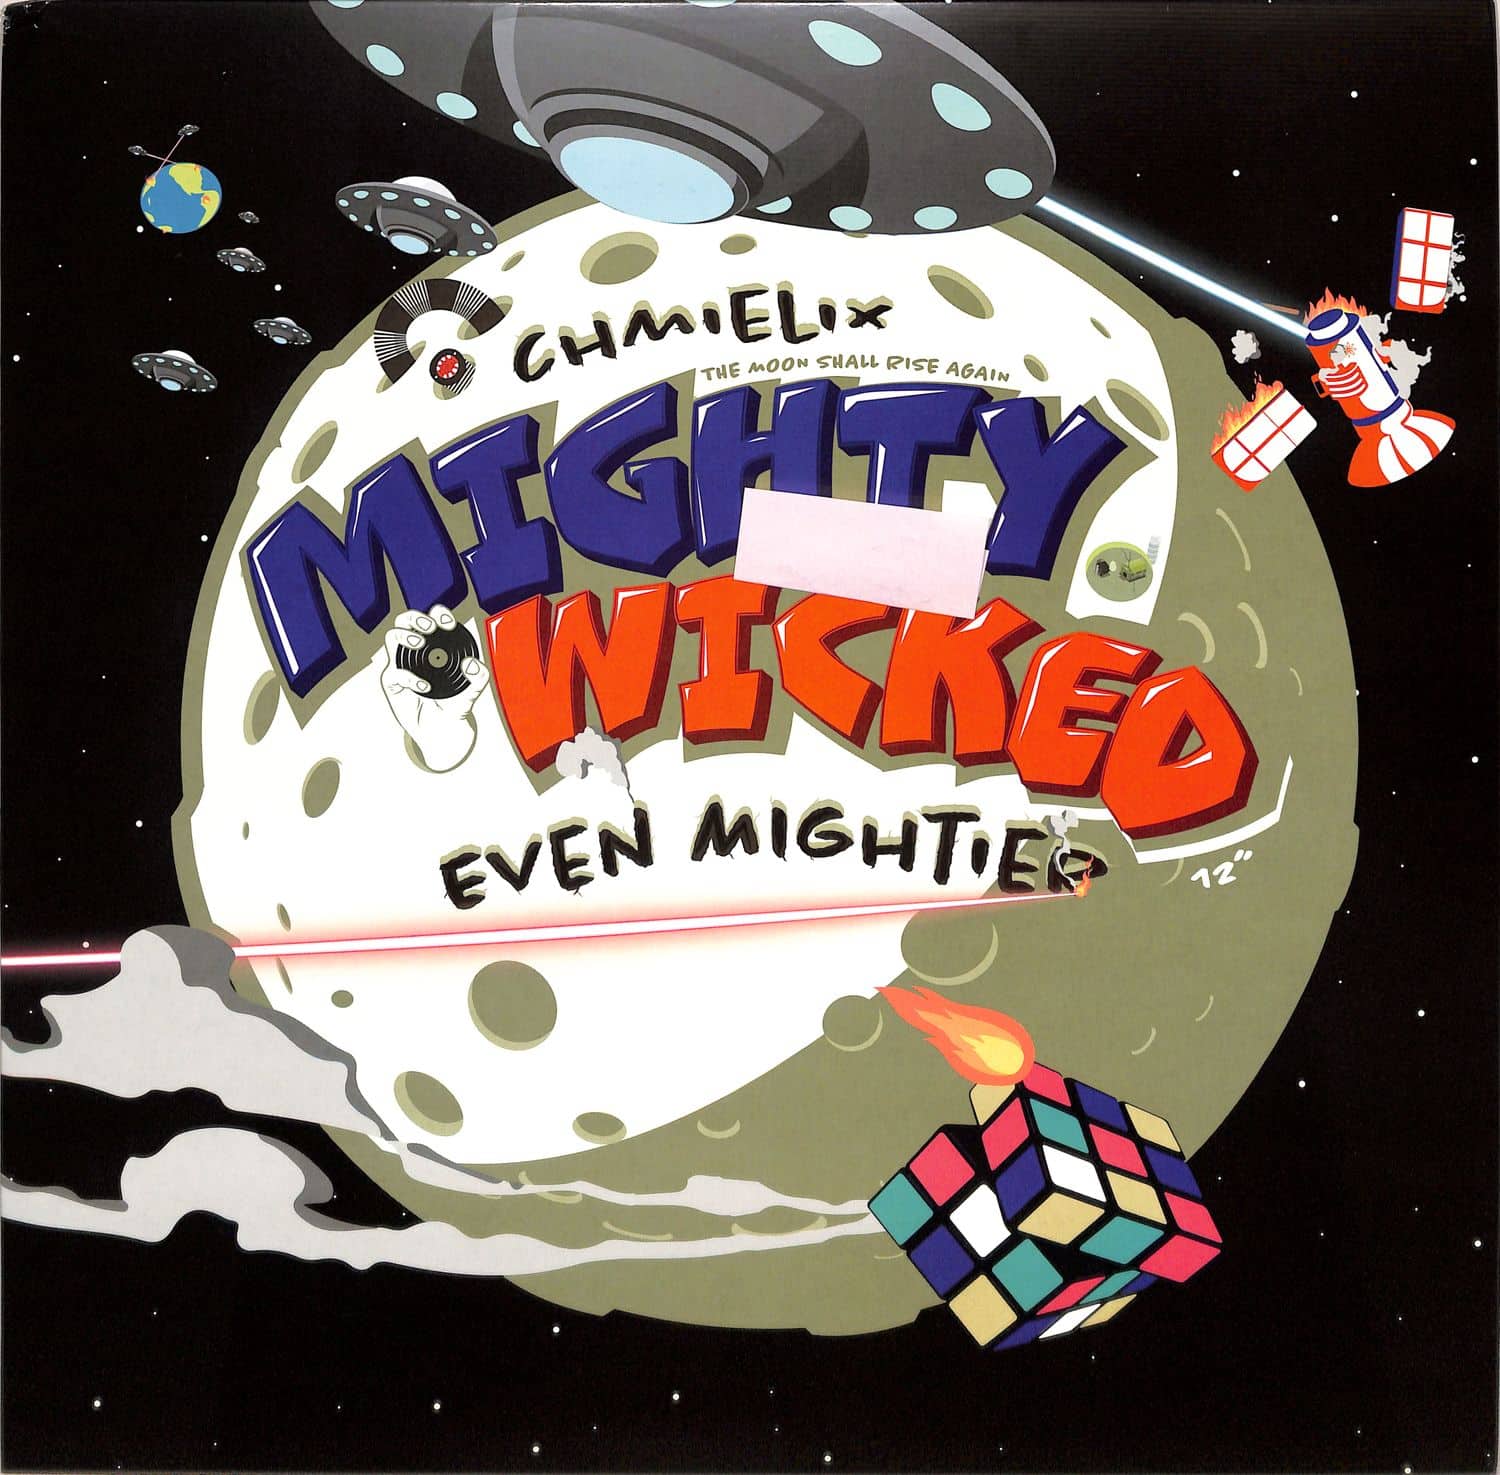 Chmielix - MIGHTY WICKED - EVEN MIGHTIER